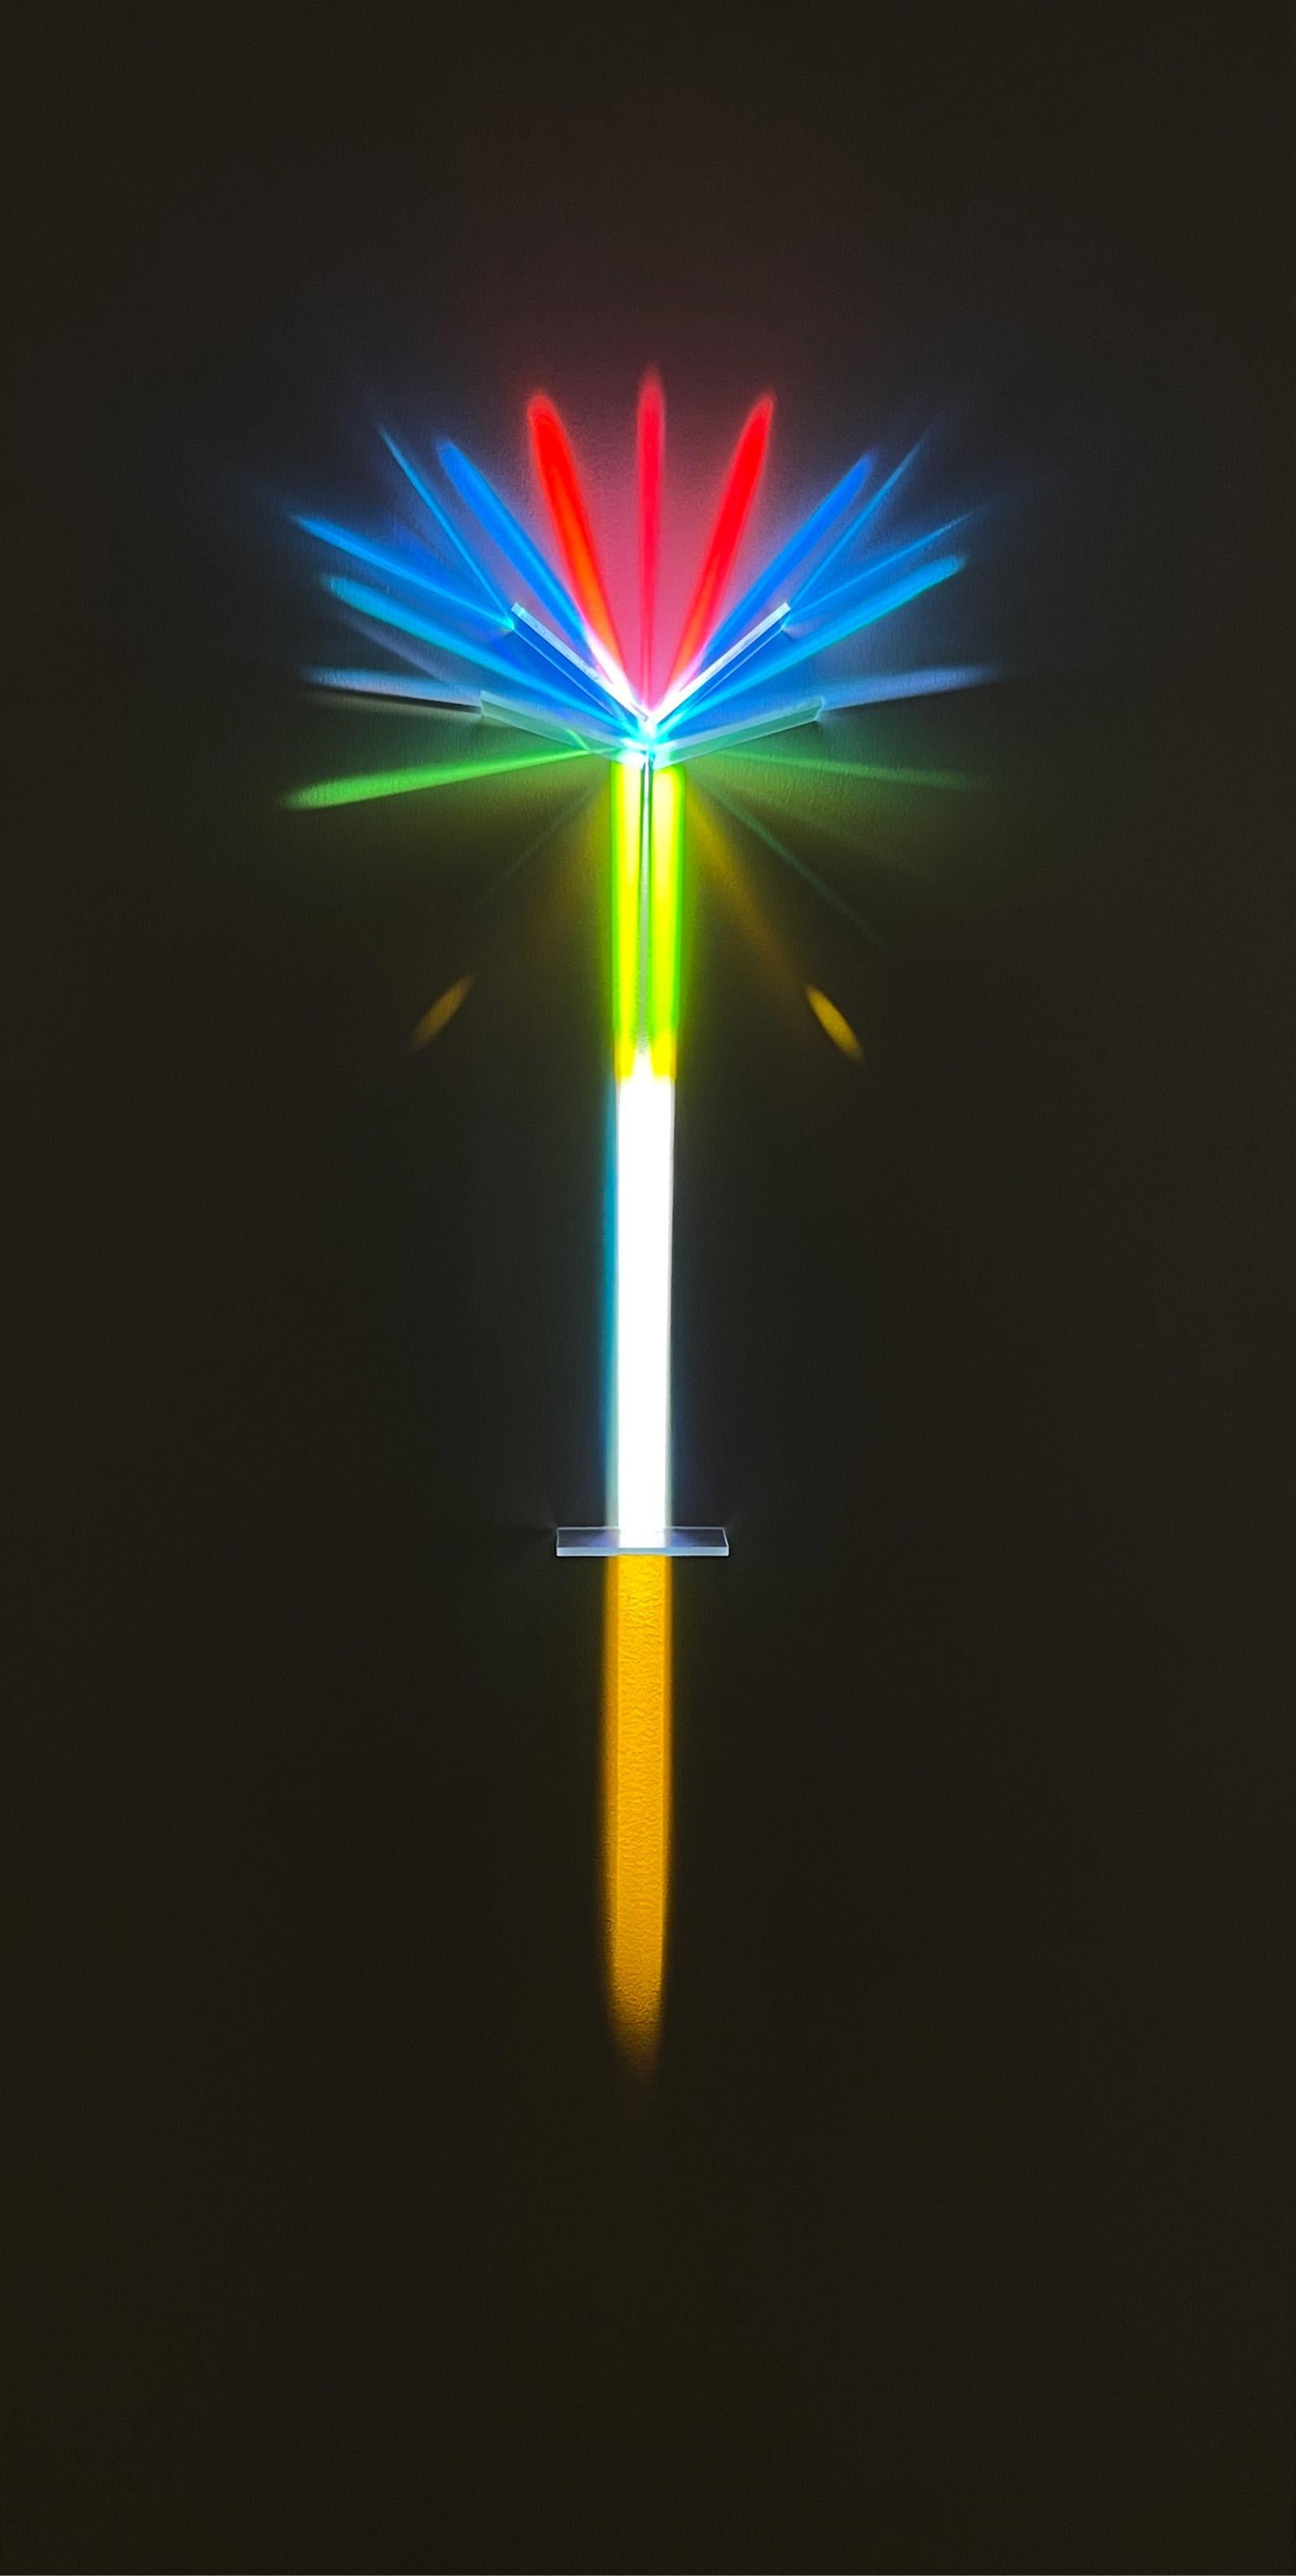 "Garden of Hues #6" Mixed Media Light Installation 48 x 24 in by astrothebaptist

Dichroic optical filters on painted wood birchwood panel and single source of light installation

Components: 
White panel
Colored glass
Projector

IMPORTANT: comes